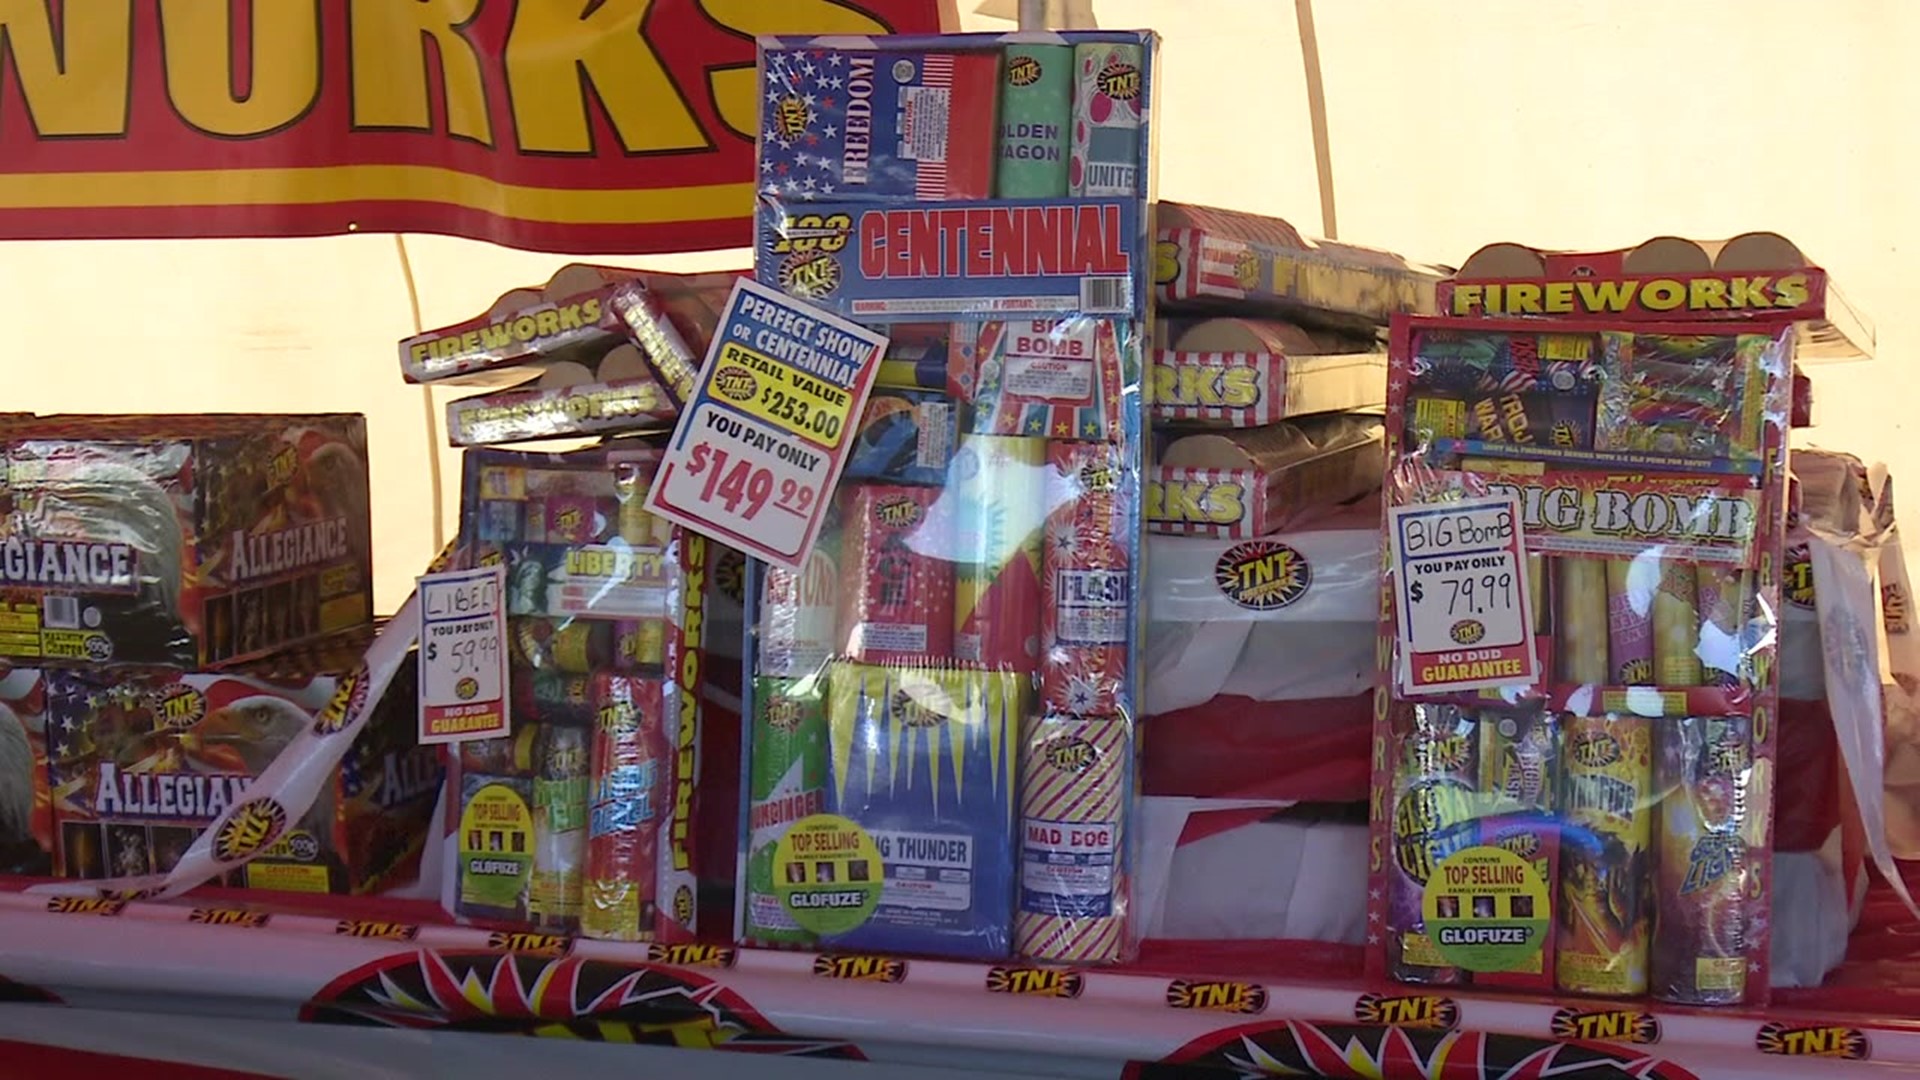 They say the fireworks aren't only being set off on holidays; they are being fired constantly, from sundown to sunrise.